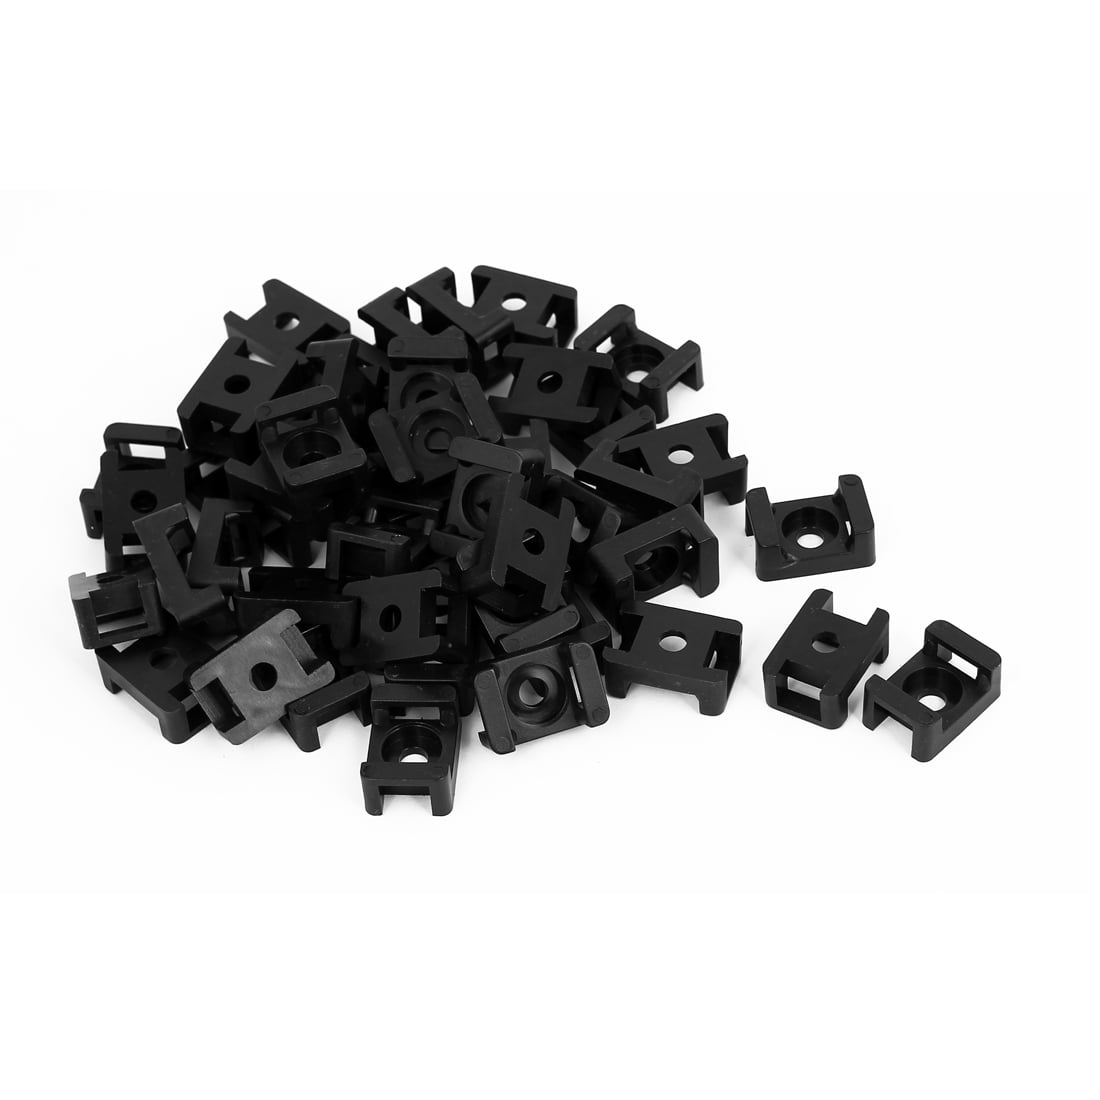 Cable Tie Base Saddle for 5mm/9mm Zip Ties Cradle Mounts Base Clips Cable Holder 